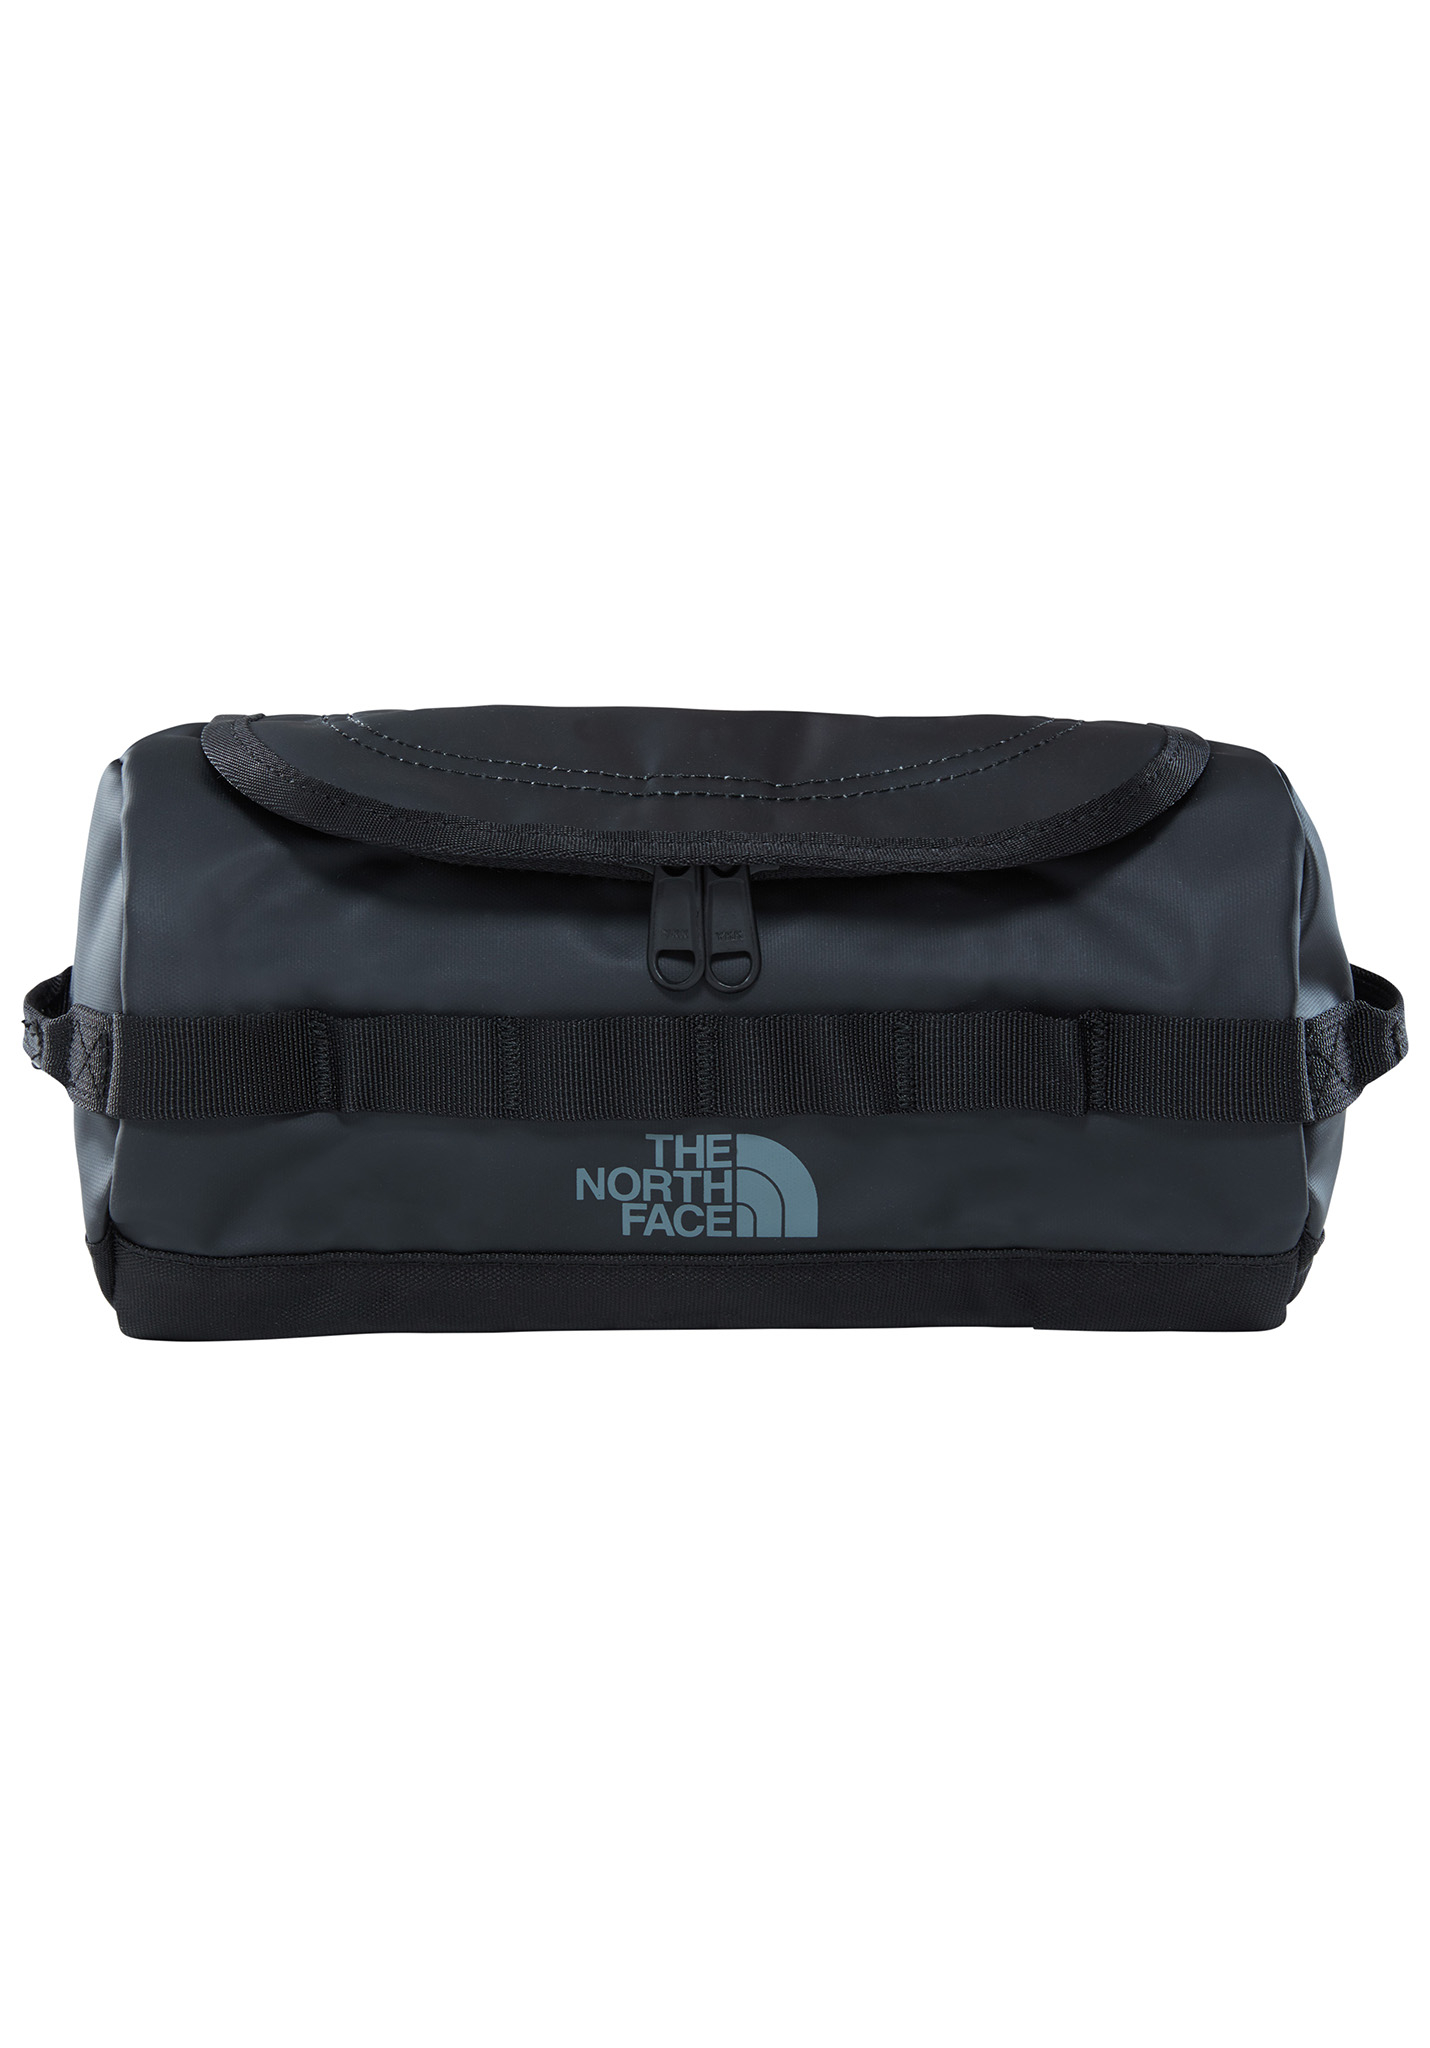 The North Face Bc Travel Canister S Kulturbeutel tnf schwarz One Size